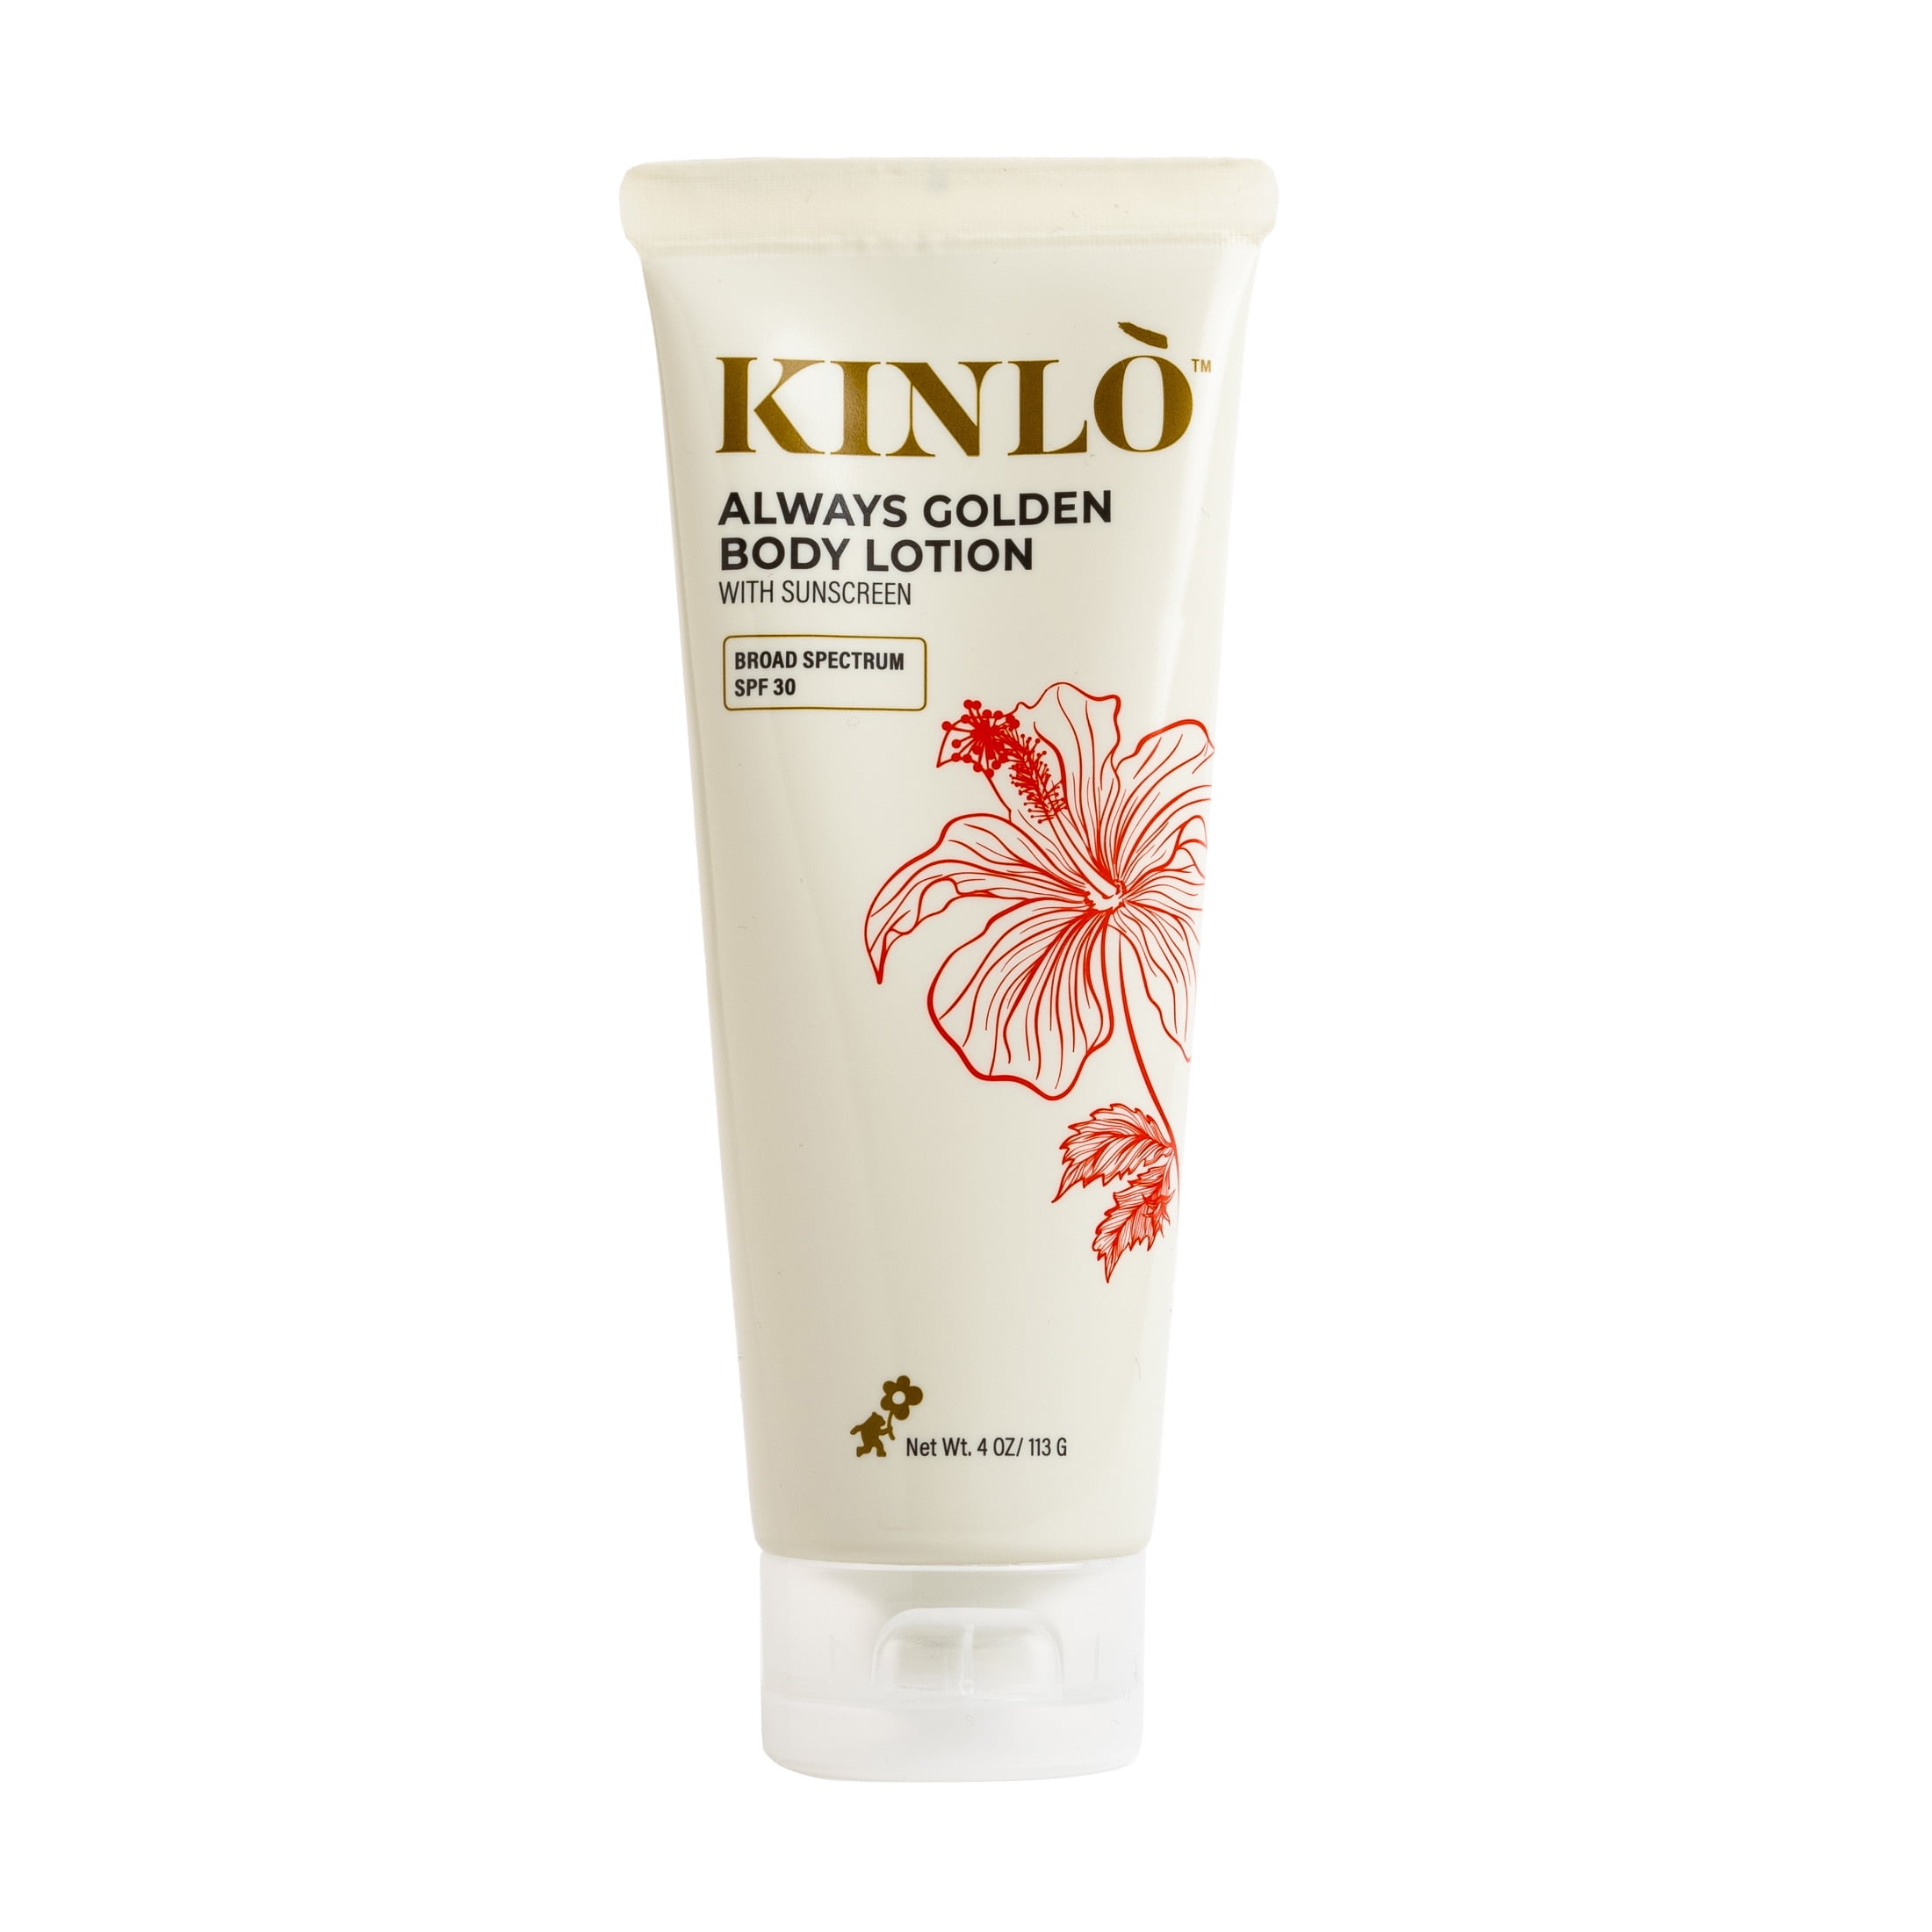 KINLO Always Golden Body Lotion with SPF 30, Daily Moisturizer, Blue Light Protection, Non-Greasy 4 oz